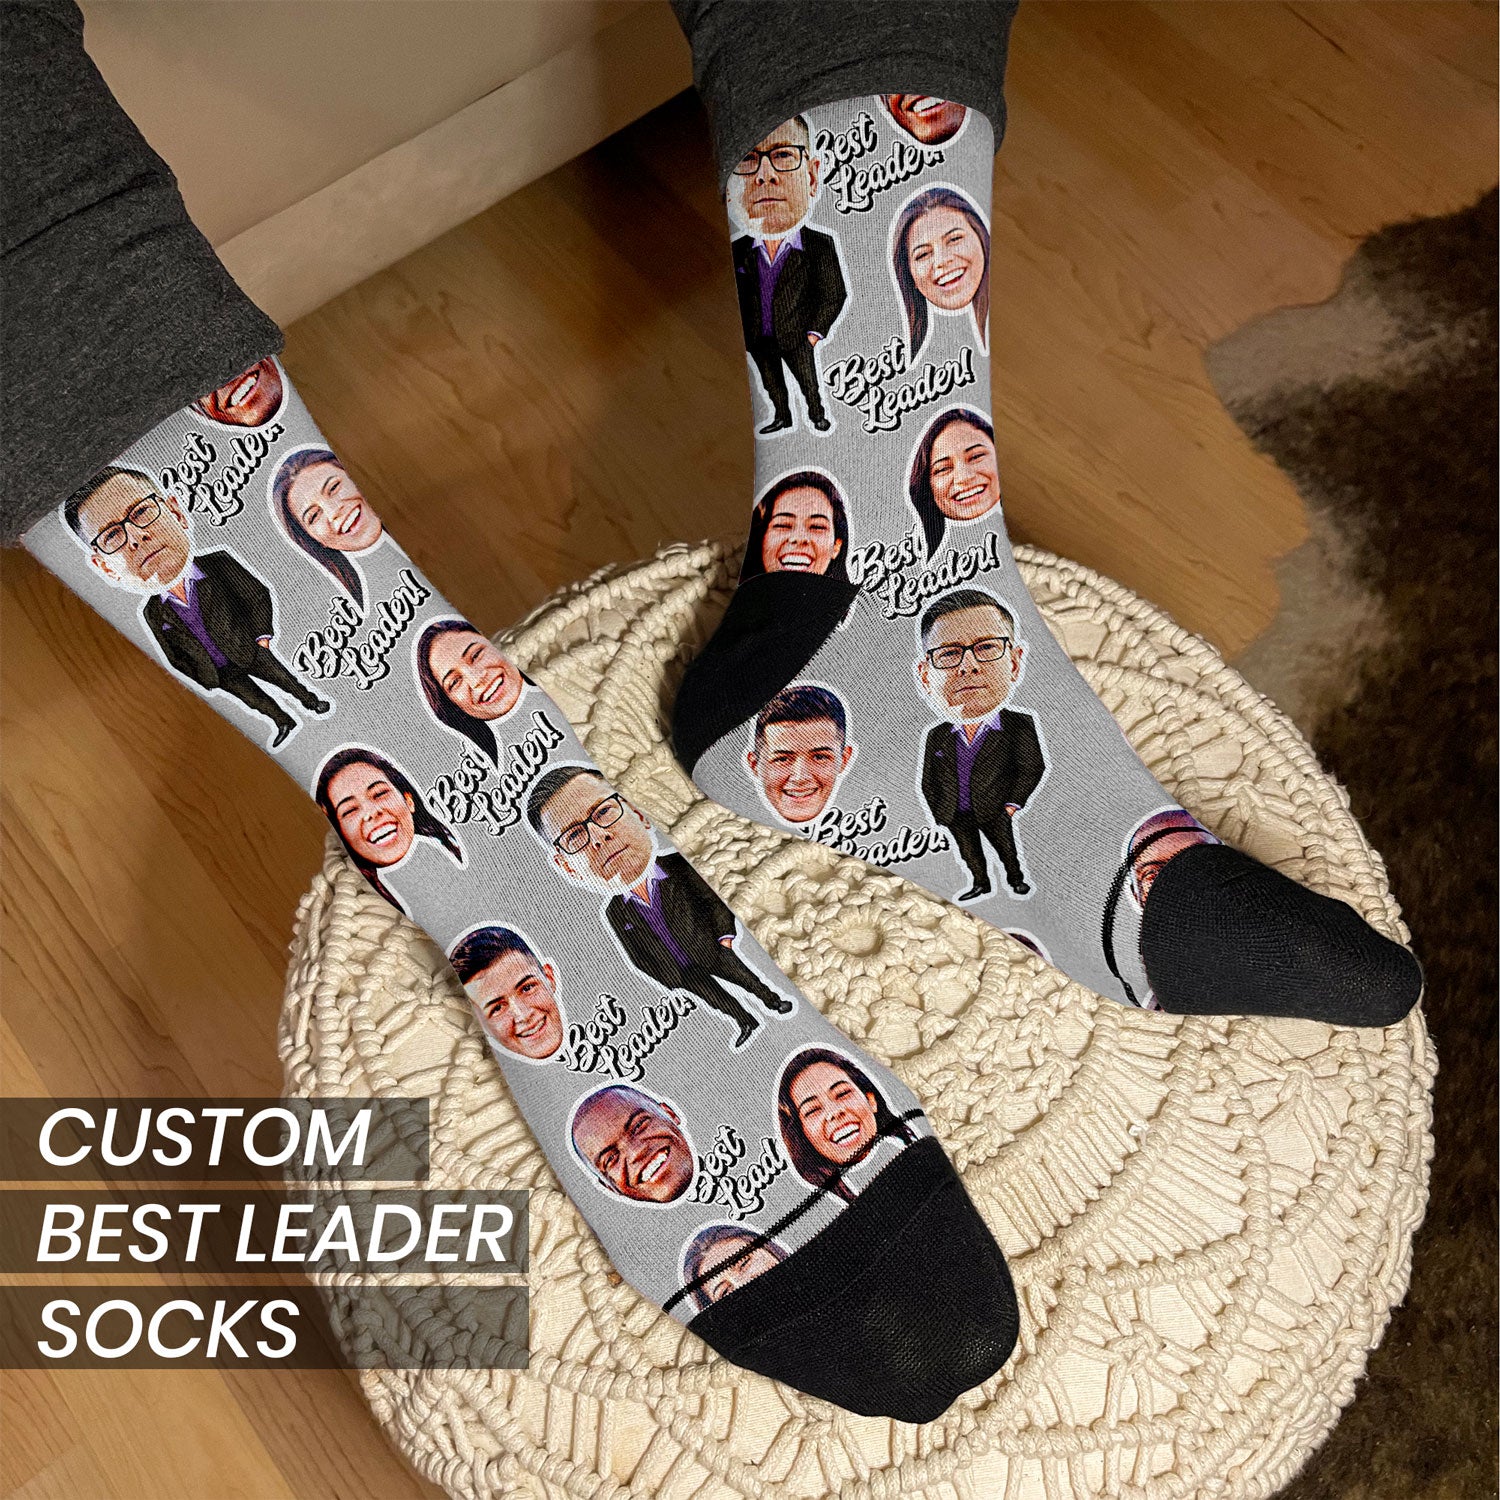 personalized socks for boss day with faces of coworkers on a grey sock